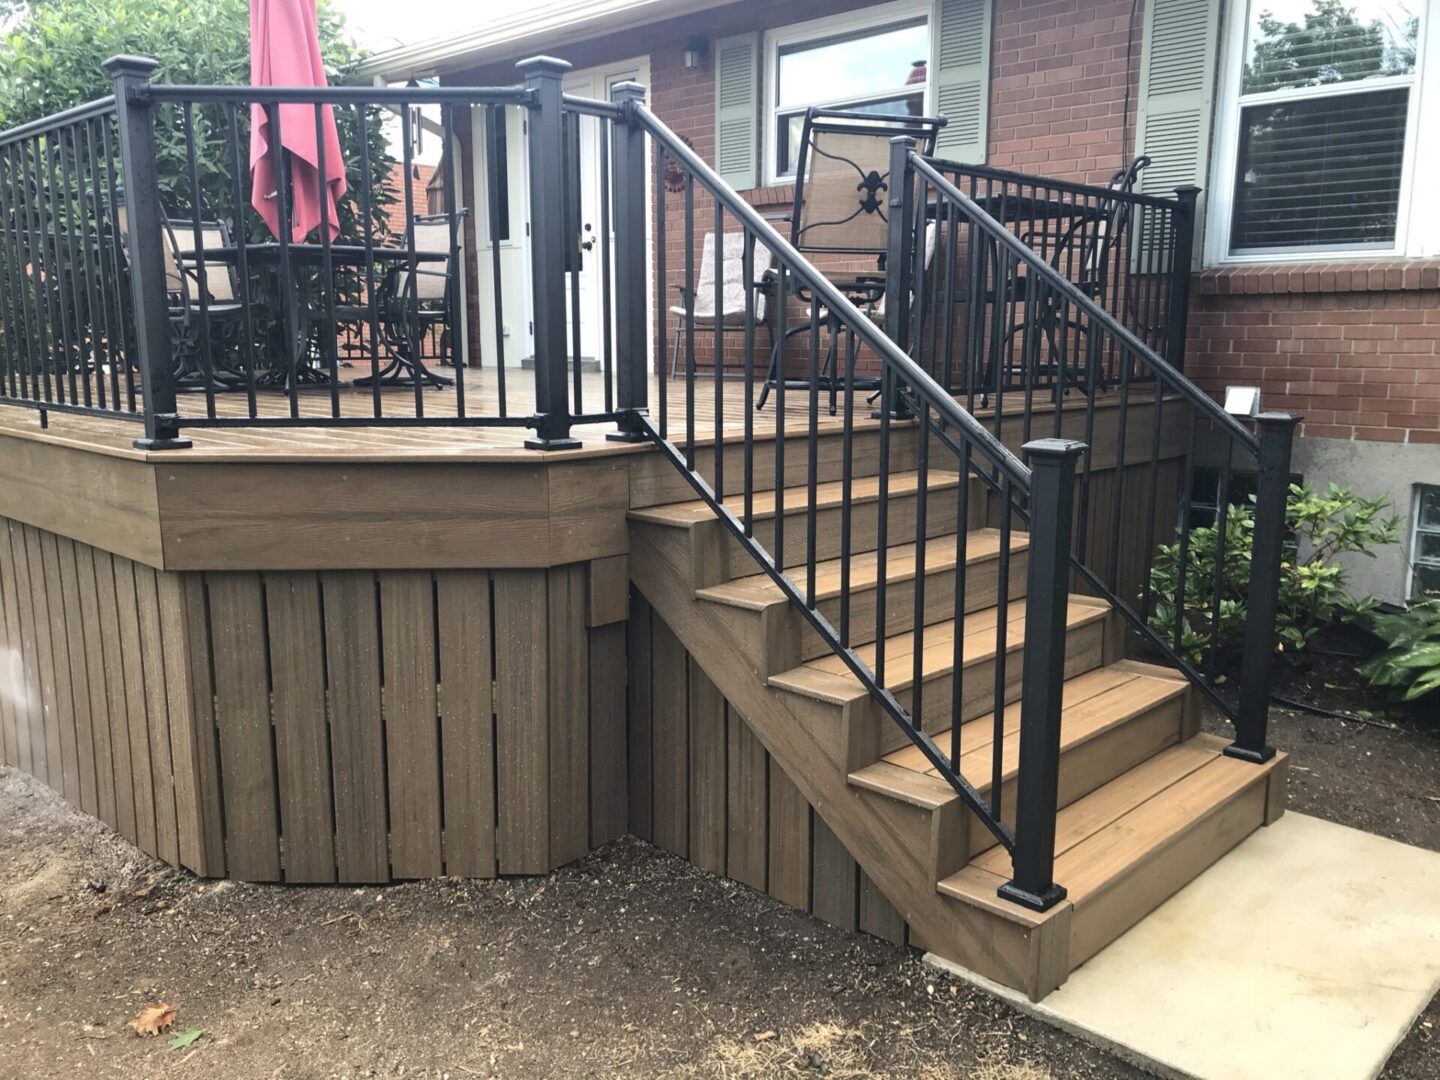 A deck with stairs and railing in the middle of it